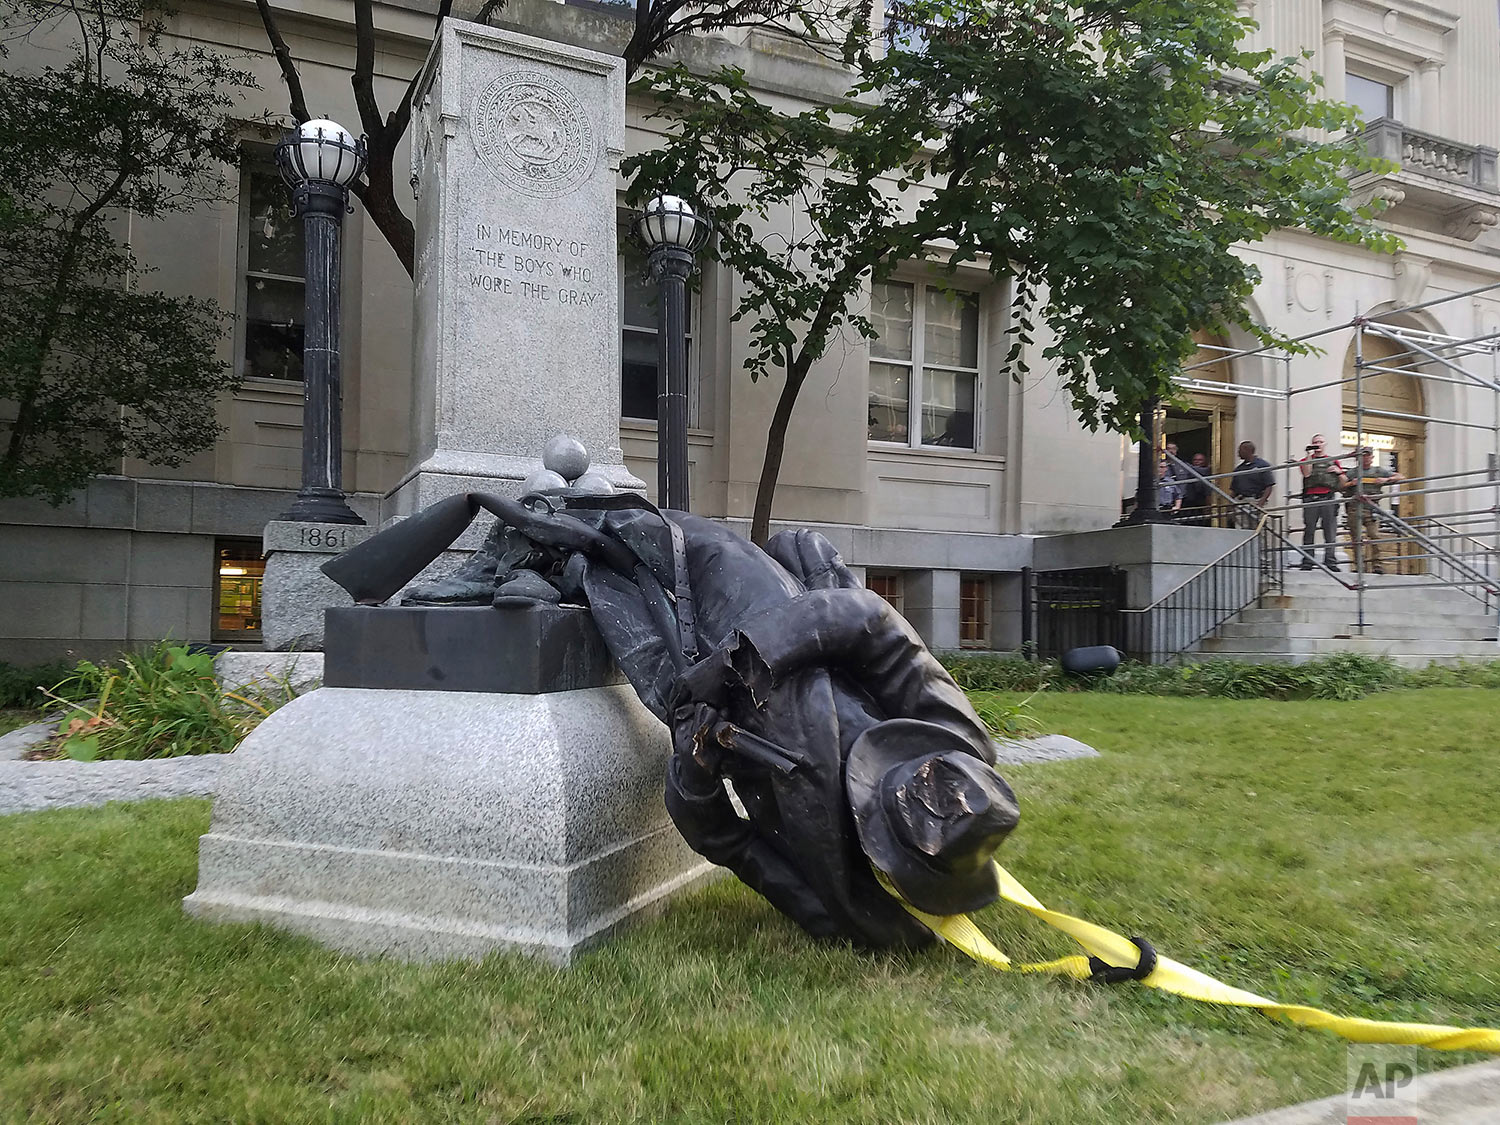  A toppled Confederate statue lies on the ground on Monday, Aug. 14, 2017, in Durham, N.C. Activists on Monday evening used a rope to pull down the monument outside a Durham courthouse. The Durham protest was in response to a white nationalist rally 